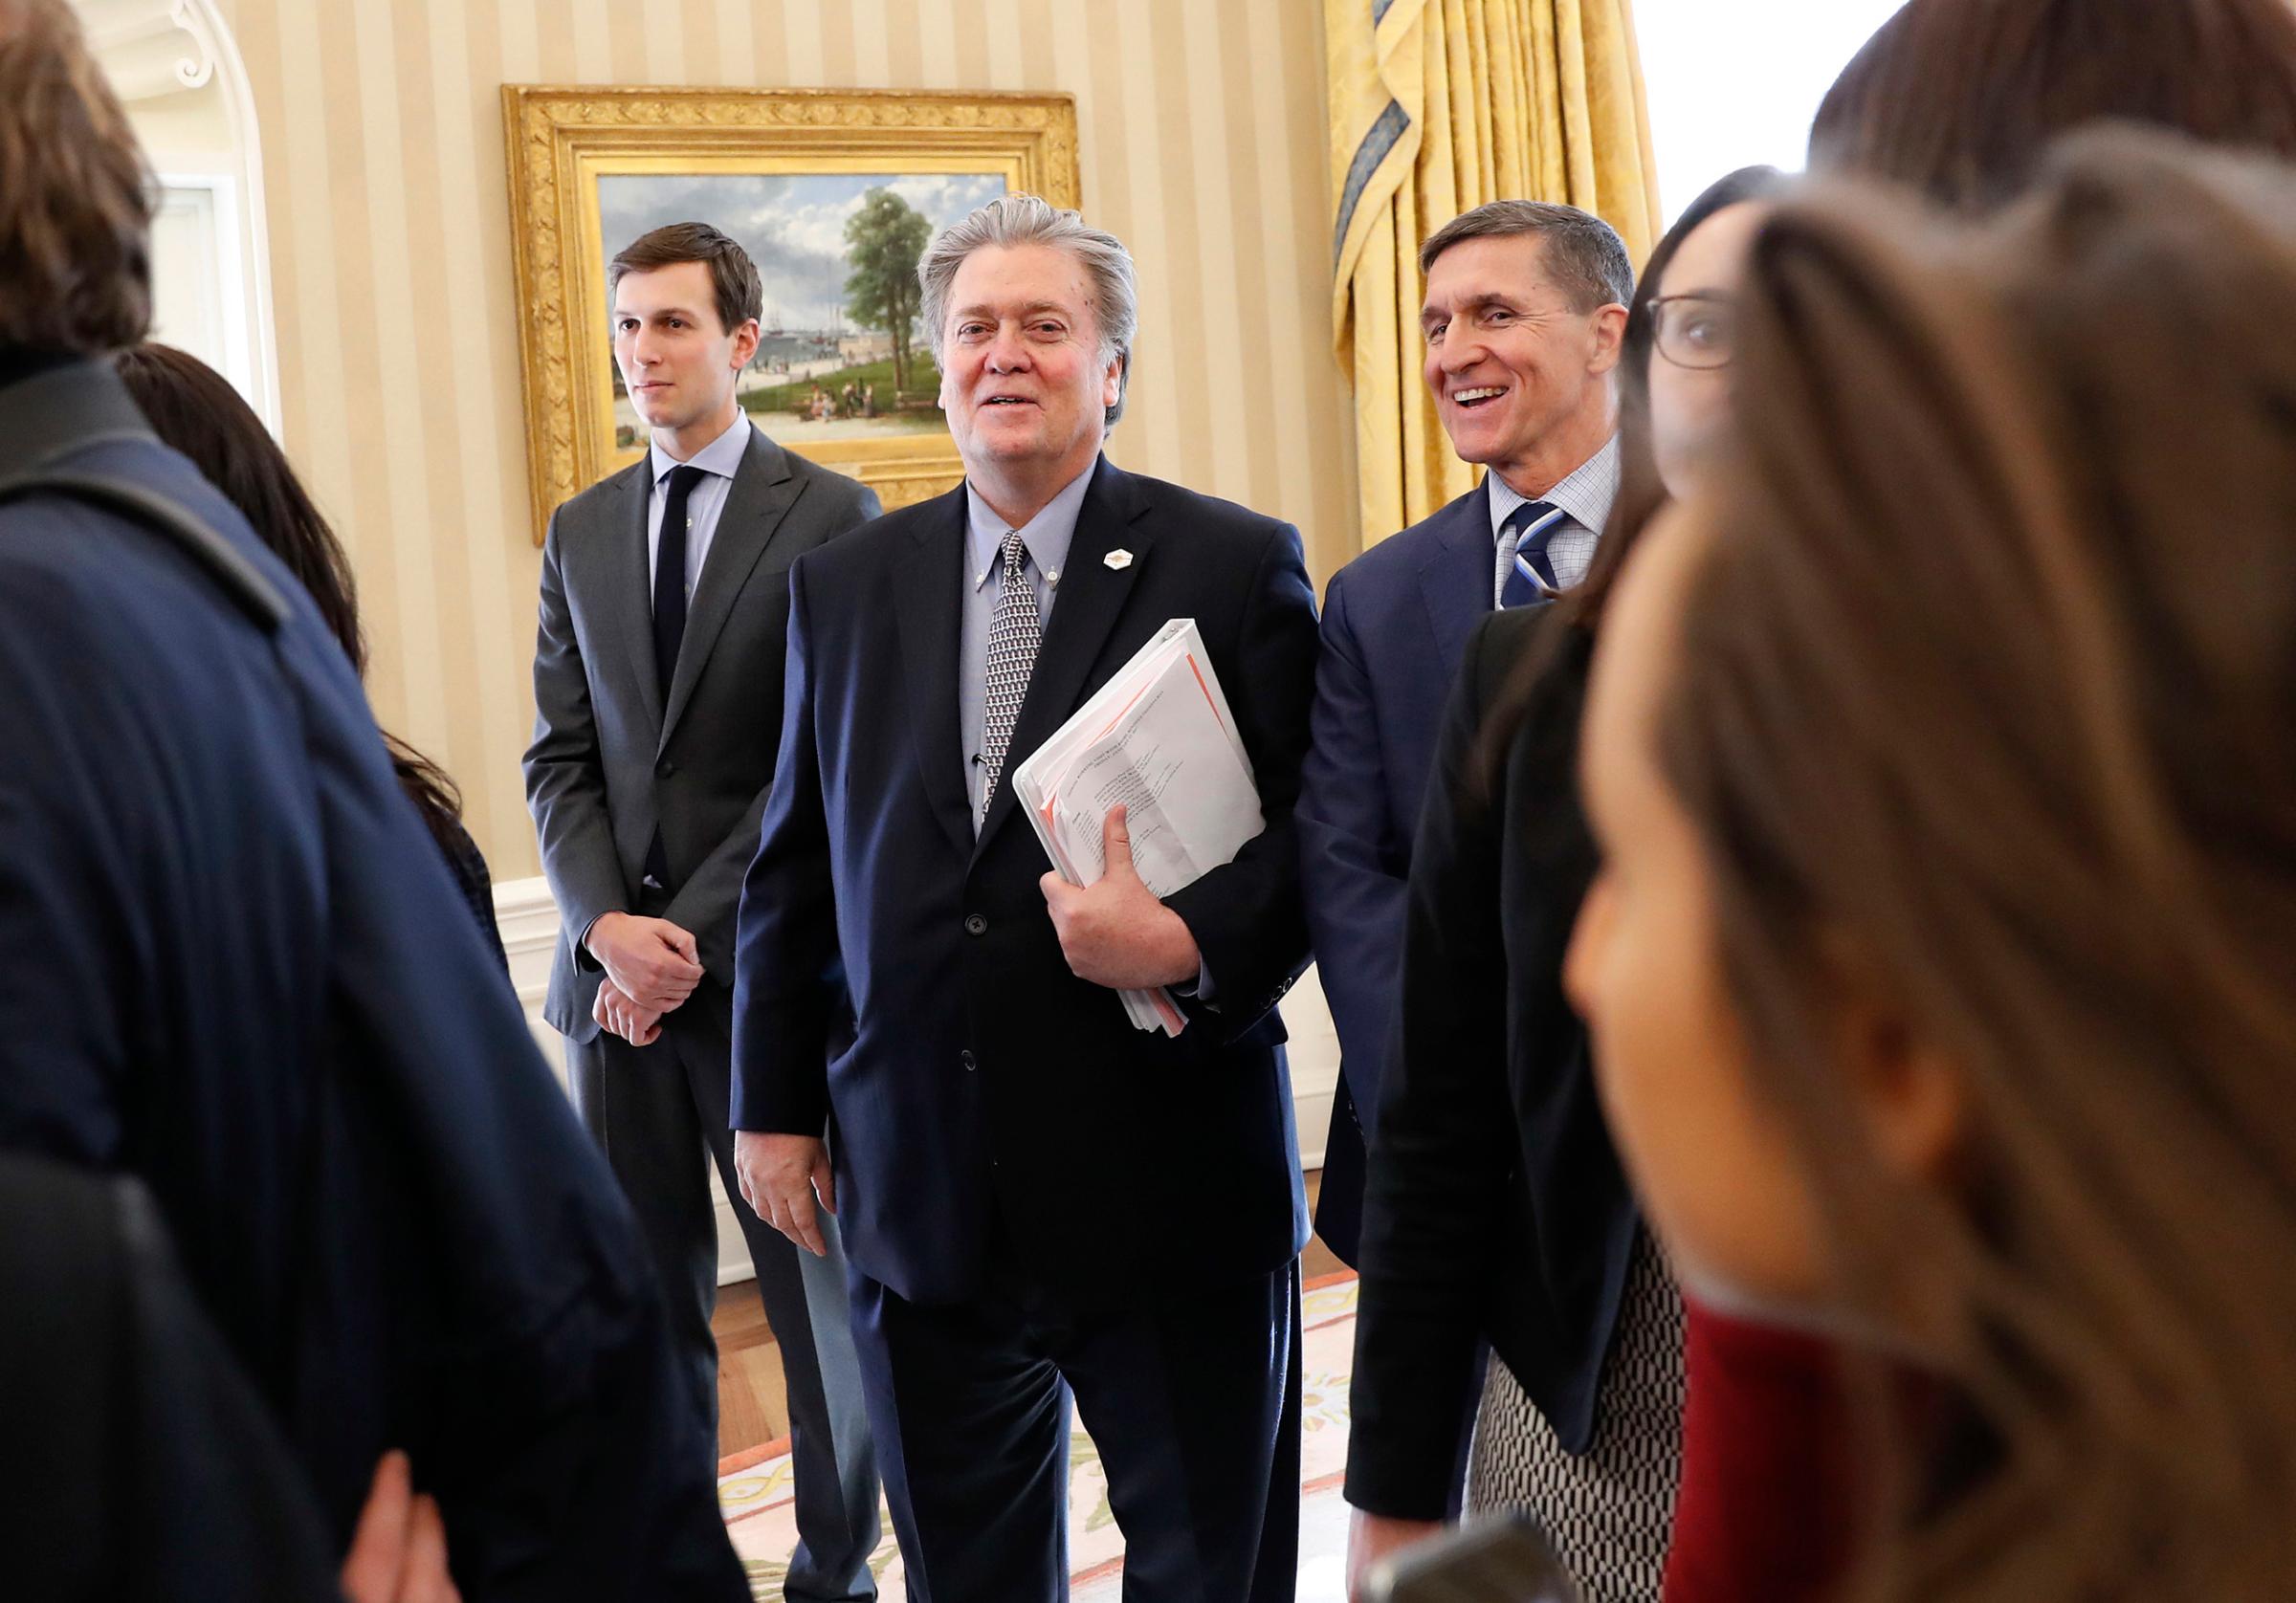 White House senior advisers Jared Kushner, Steve Bannon and national security adviser Michael Flynn in the Oval Office, during a meeting between President Trump and British Prime Minister Theresa May, Jan. 27, 2017.